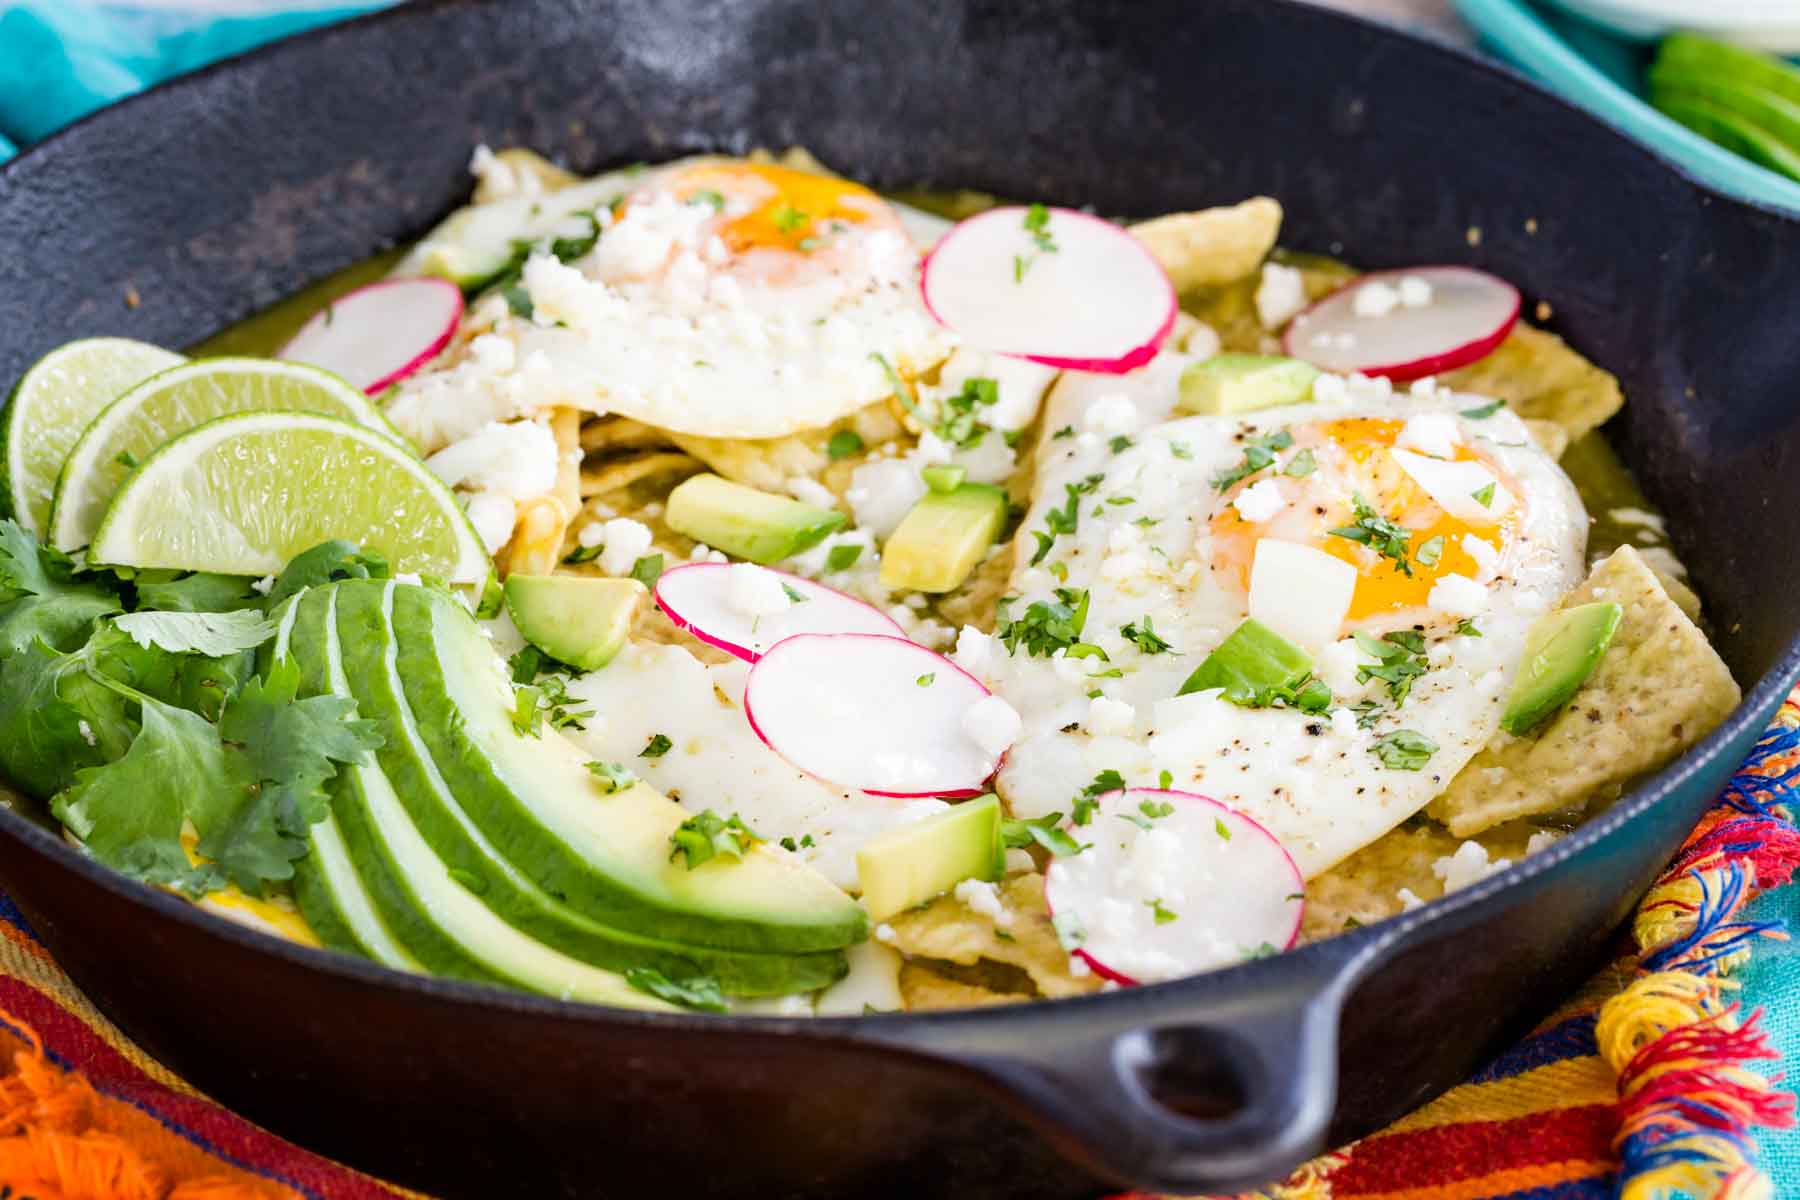 Chilaquiles verdes in a cast iron skillet topped with fried eggs, avocado, sliced radishes, and cilantro.